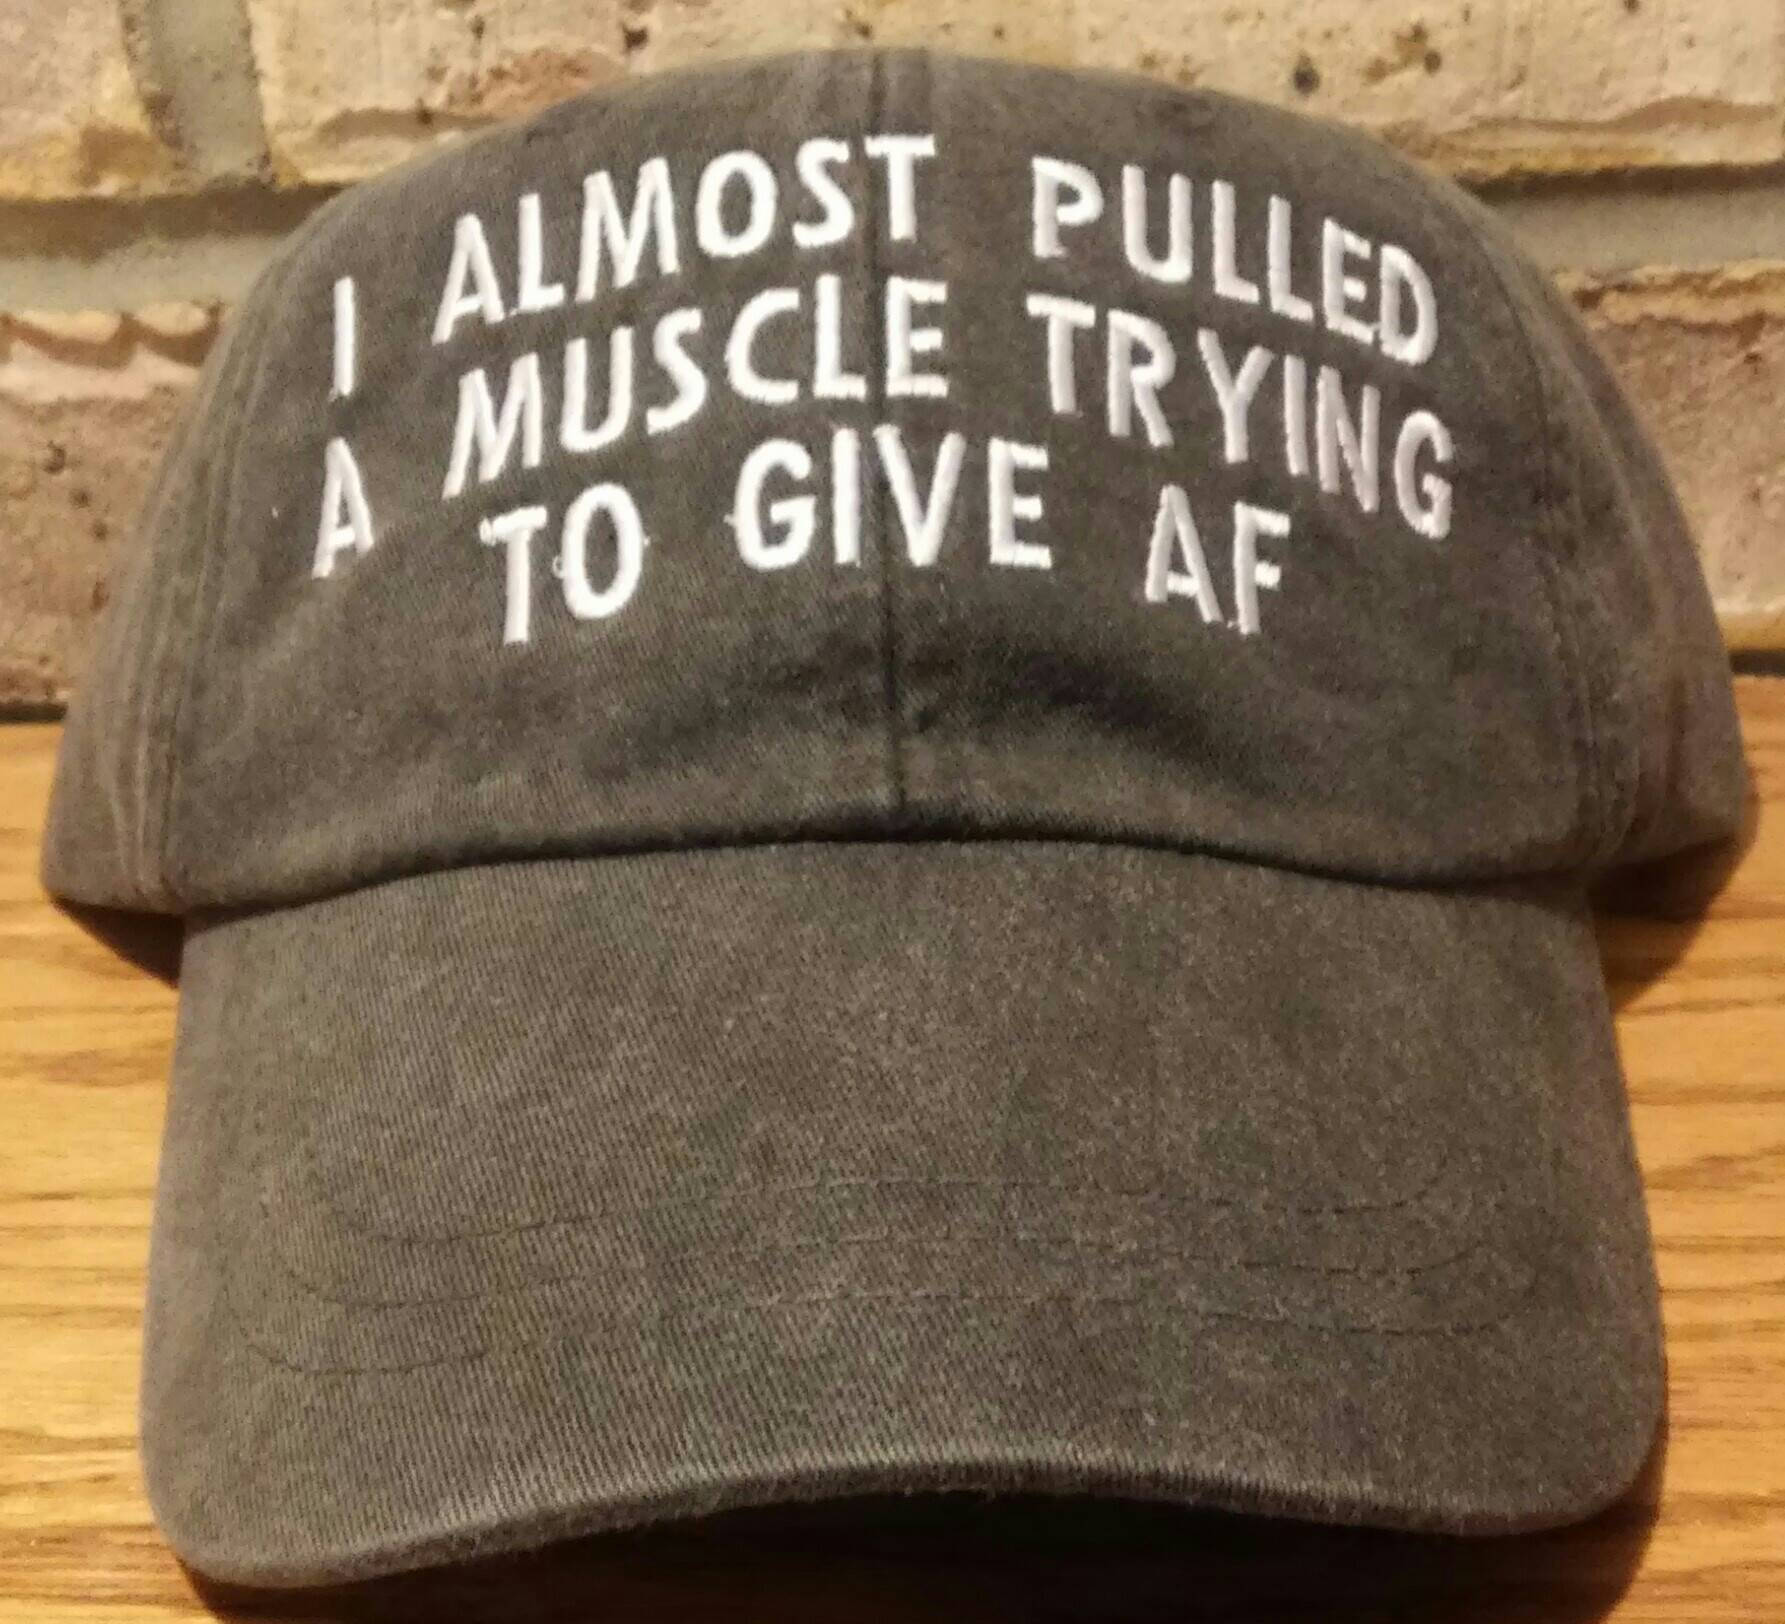 I Almost Pulled A Muscle Trying To Give AF Hat - Personalized Baseball Hat - Custom Embroidered Trucker Hat